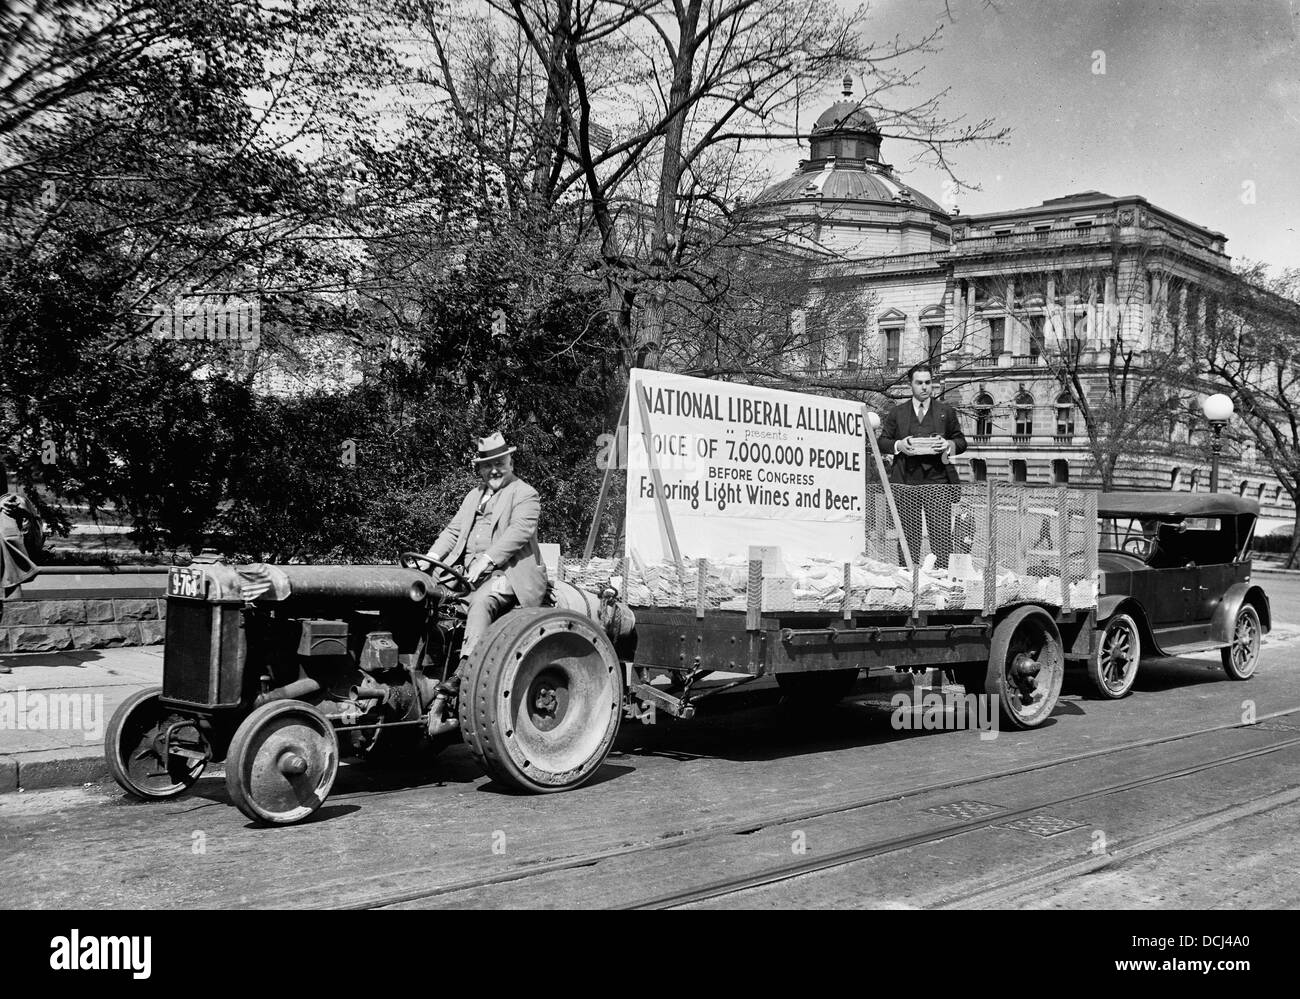 Tractor pulling trailer with sign: National Liberal Alliance presents Voice of 7,000,000 people before congress favoring light wines and beer. Library of Congress in background, Washington, D.C., circa 1925 Stock Photo